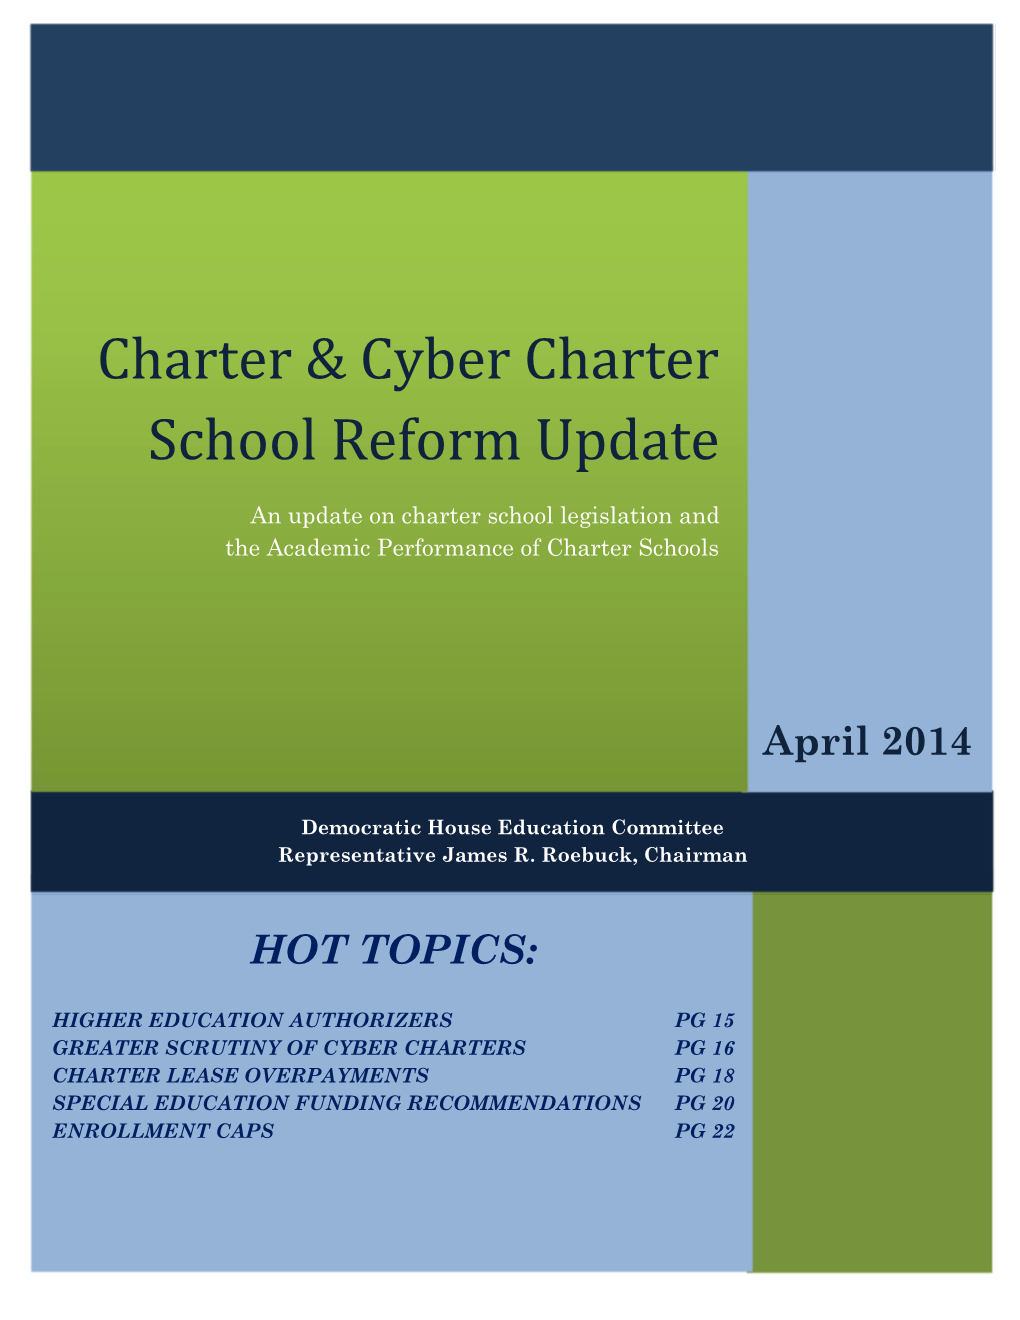 Charter and Cyber Charter School Reform Update